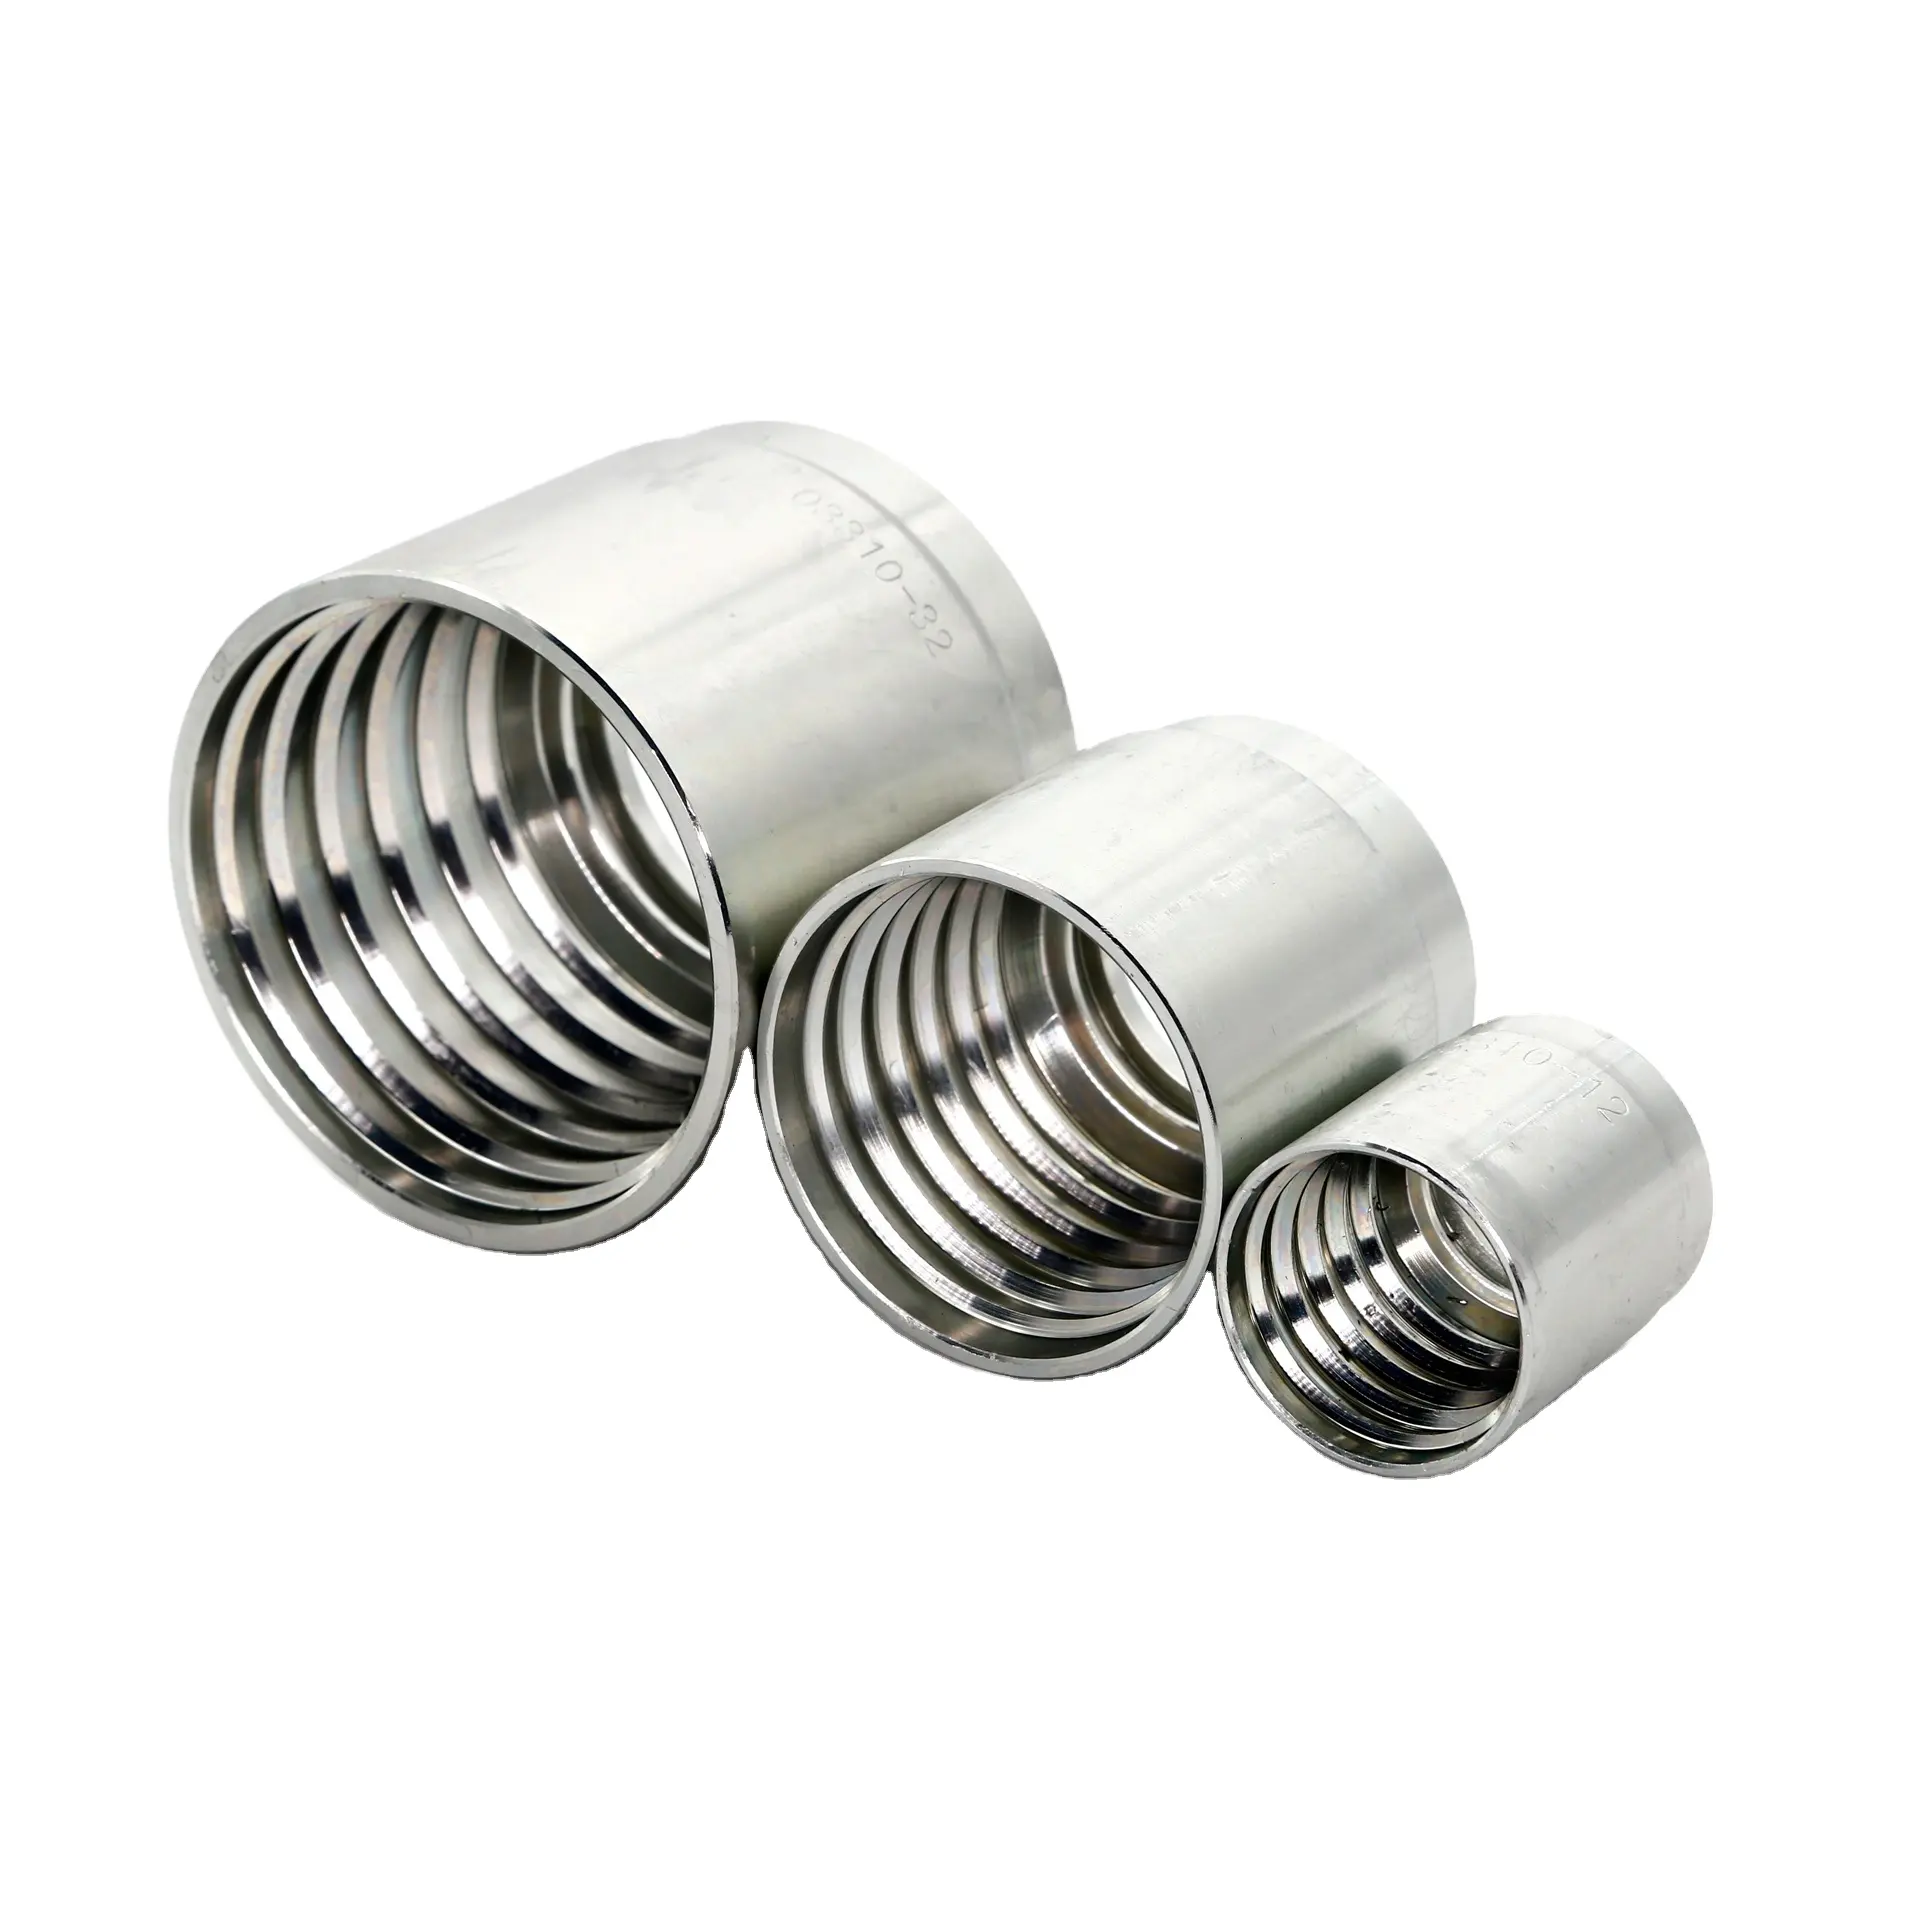 High Quality 00110 Stainless Steel Hydraulic Hose Ferrule Connectors Union Nipple Flange Pipe Fittings 50mm Size